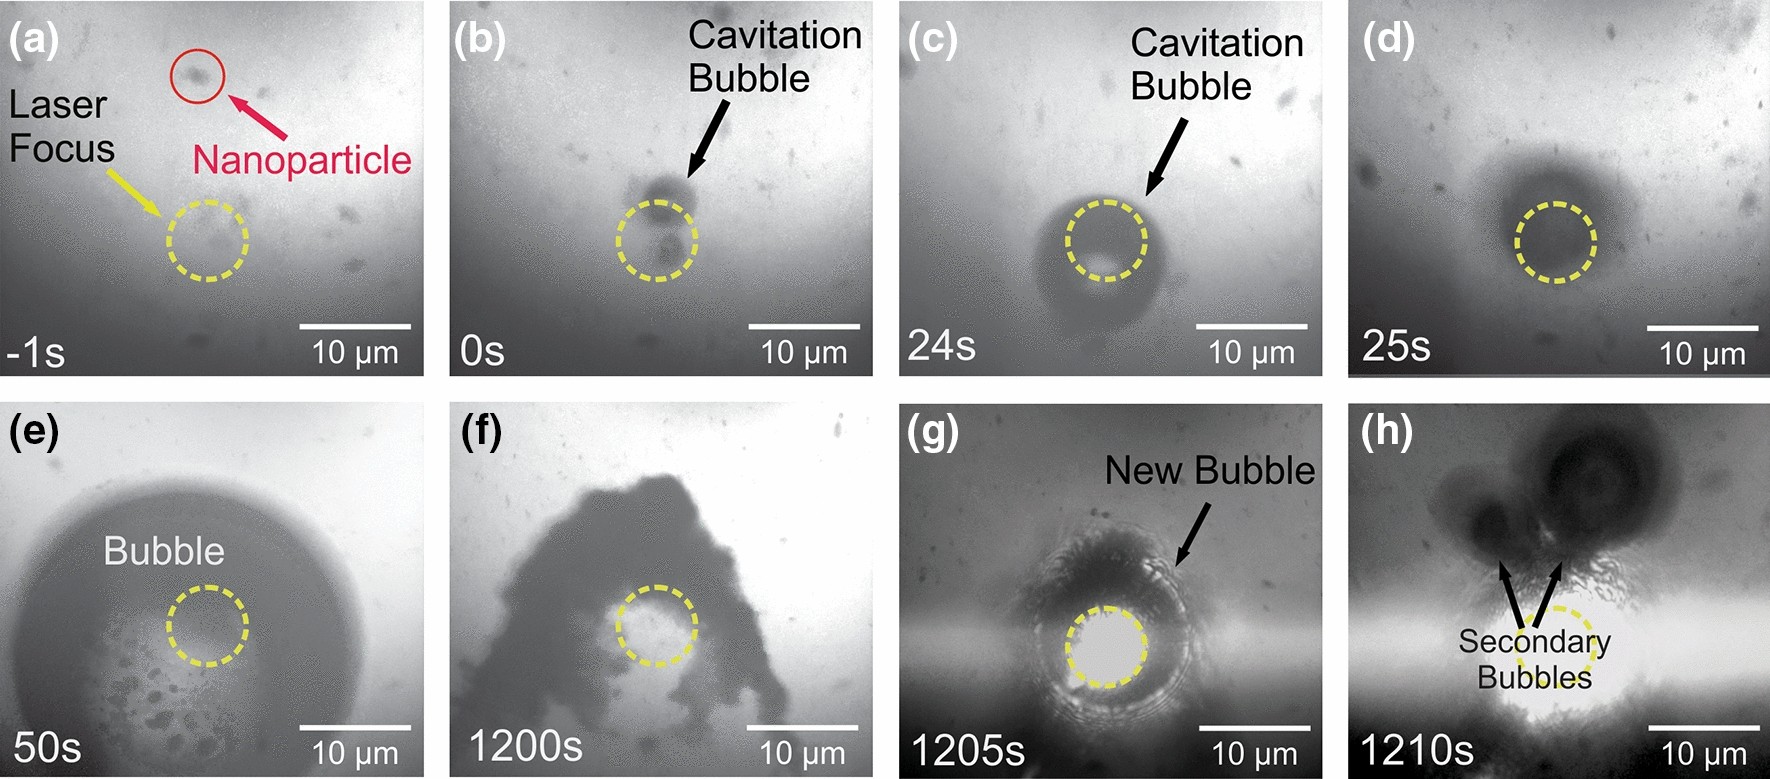 Multi-pulse laser-induced bubble formation and nanoparticle aggregation  using MoS2 nanoparticles | Scientific Reports